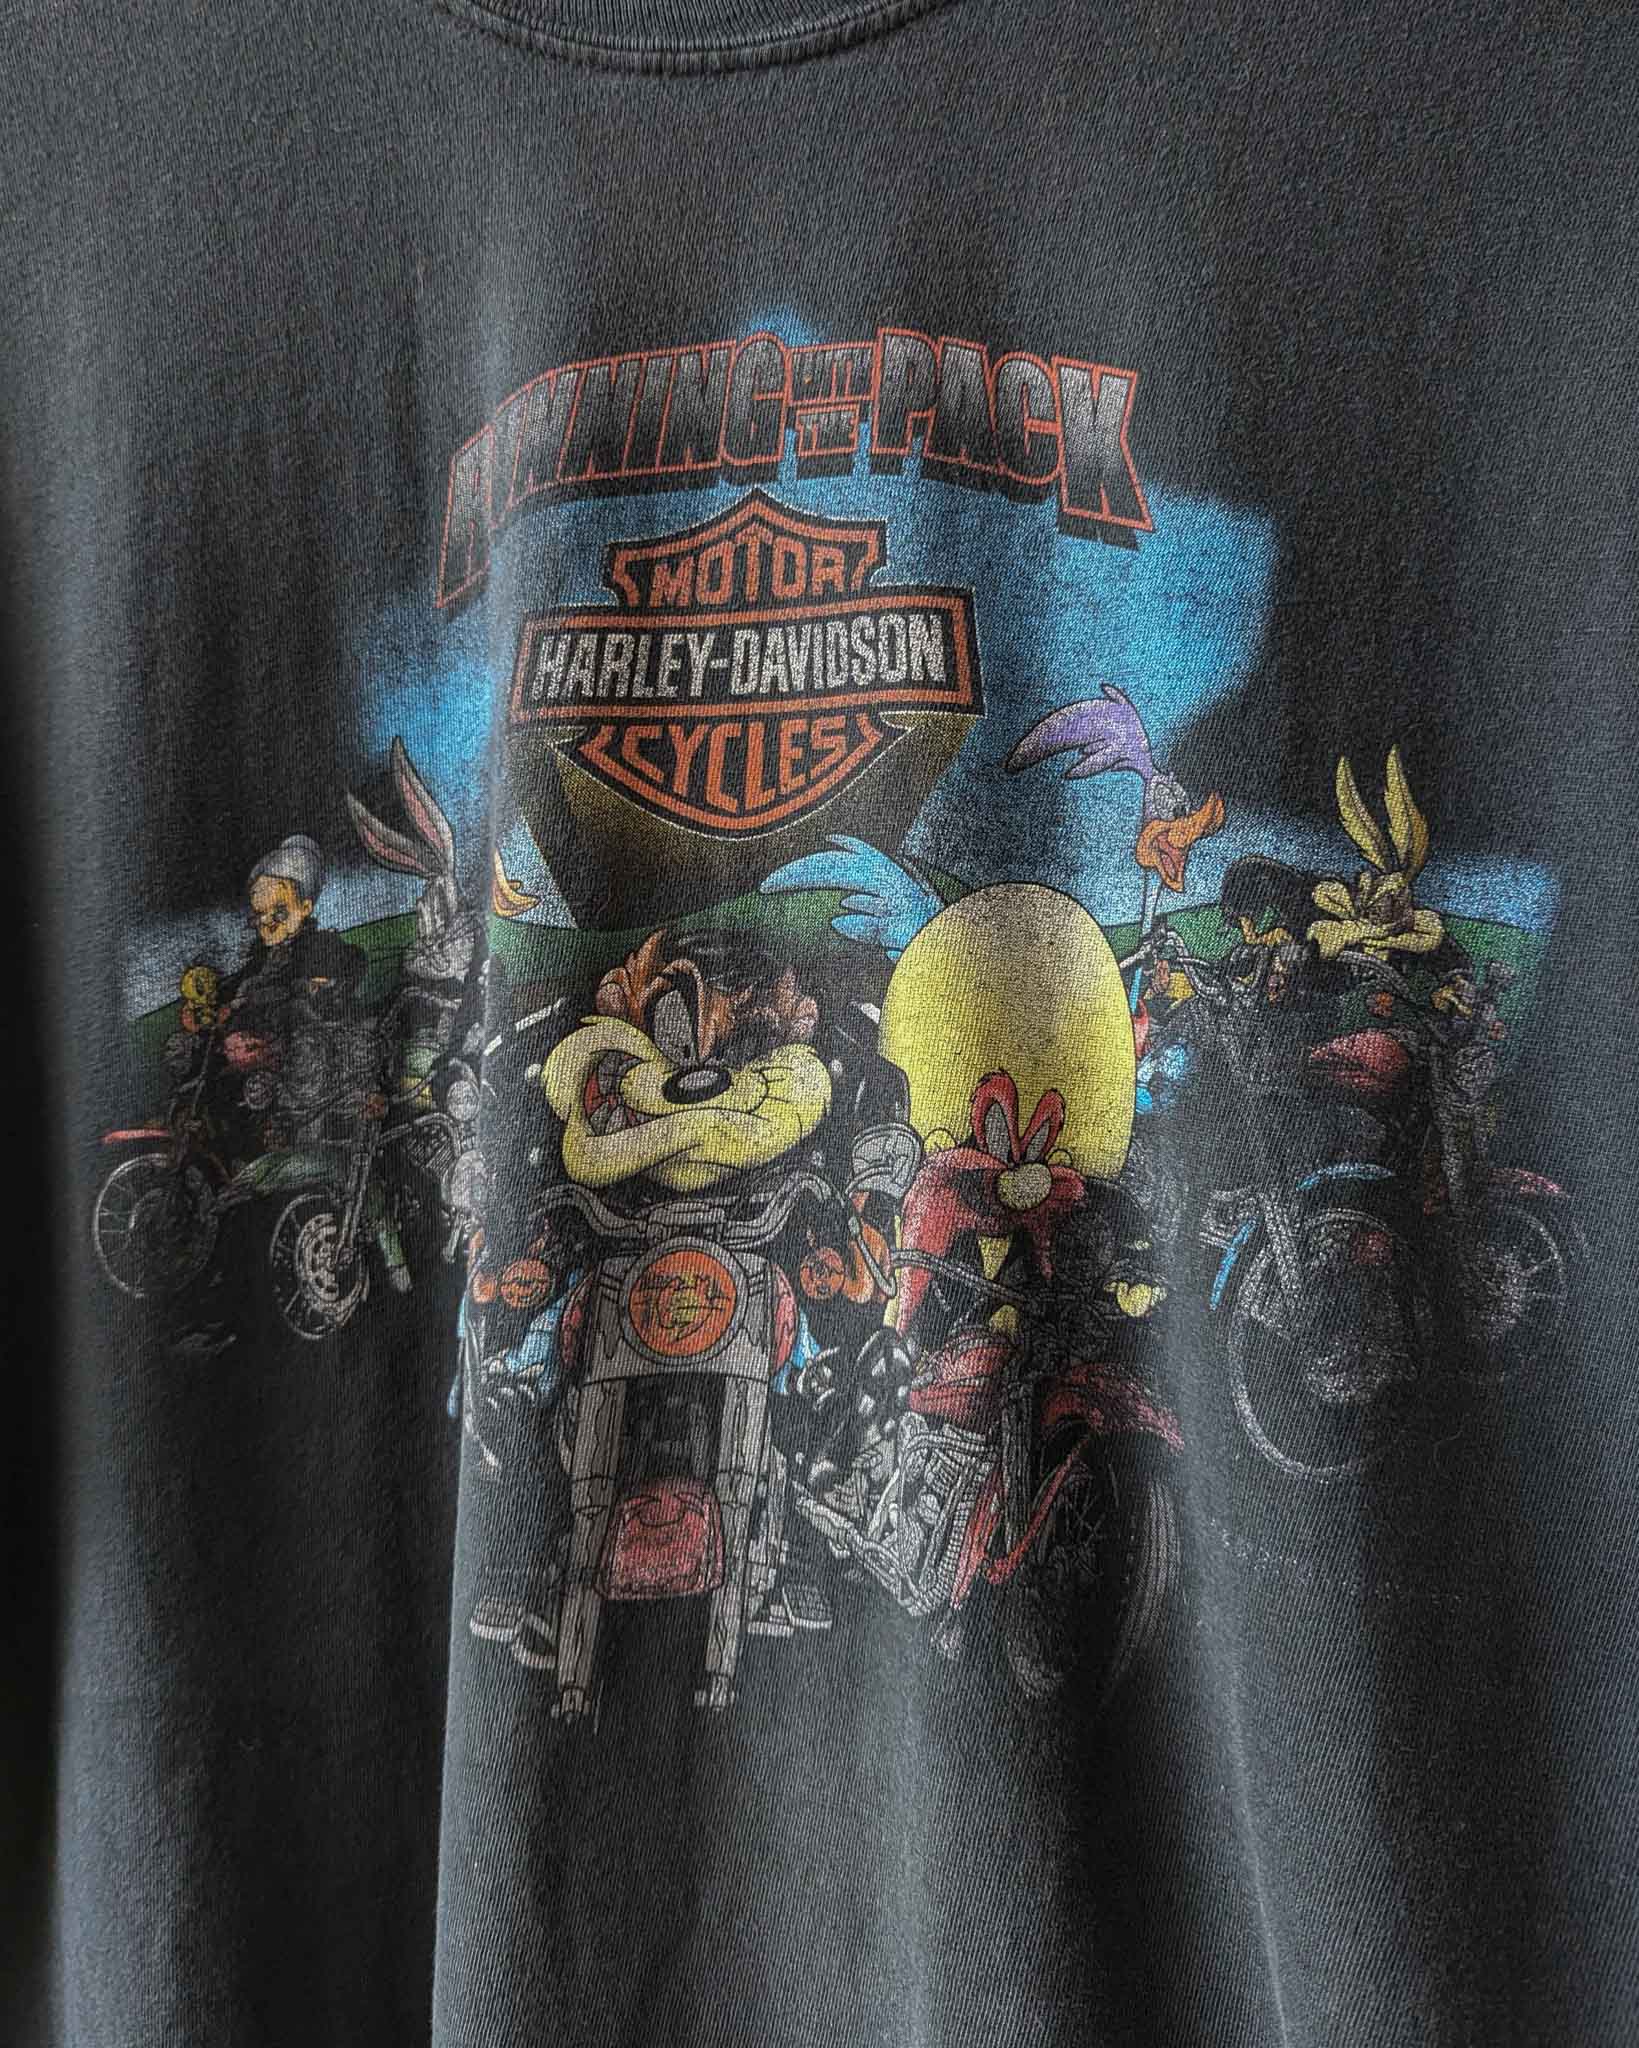 Lucky Penny Cycles Vintage T-Shirt